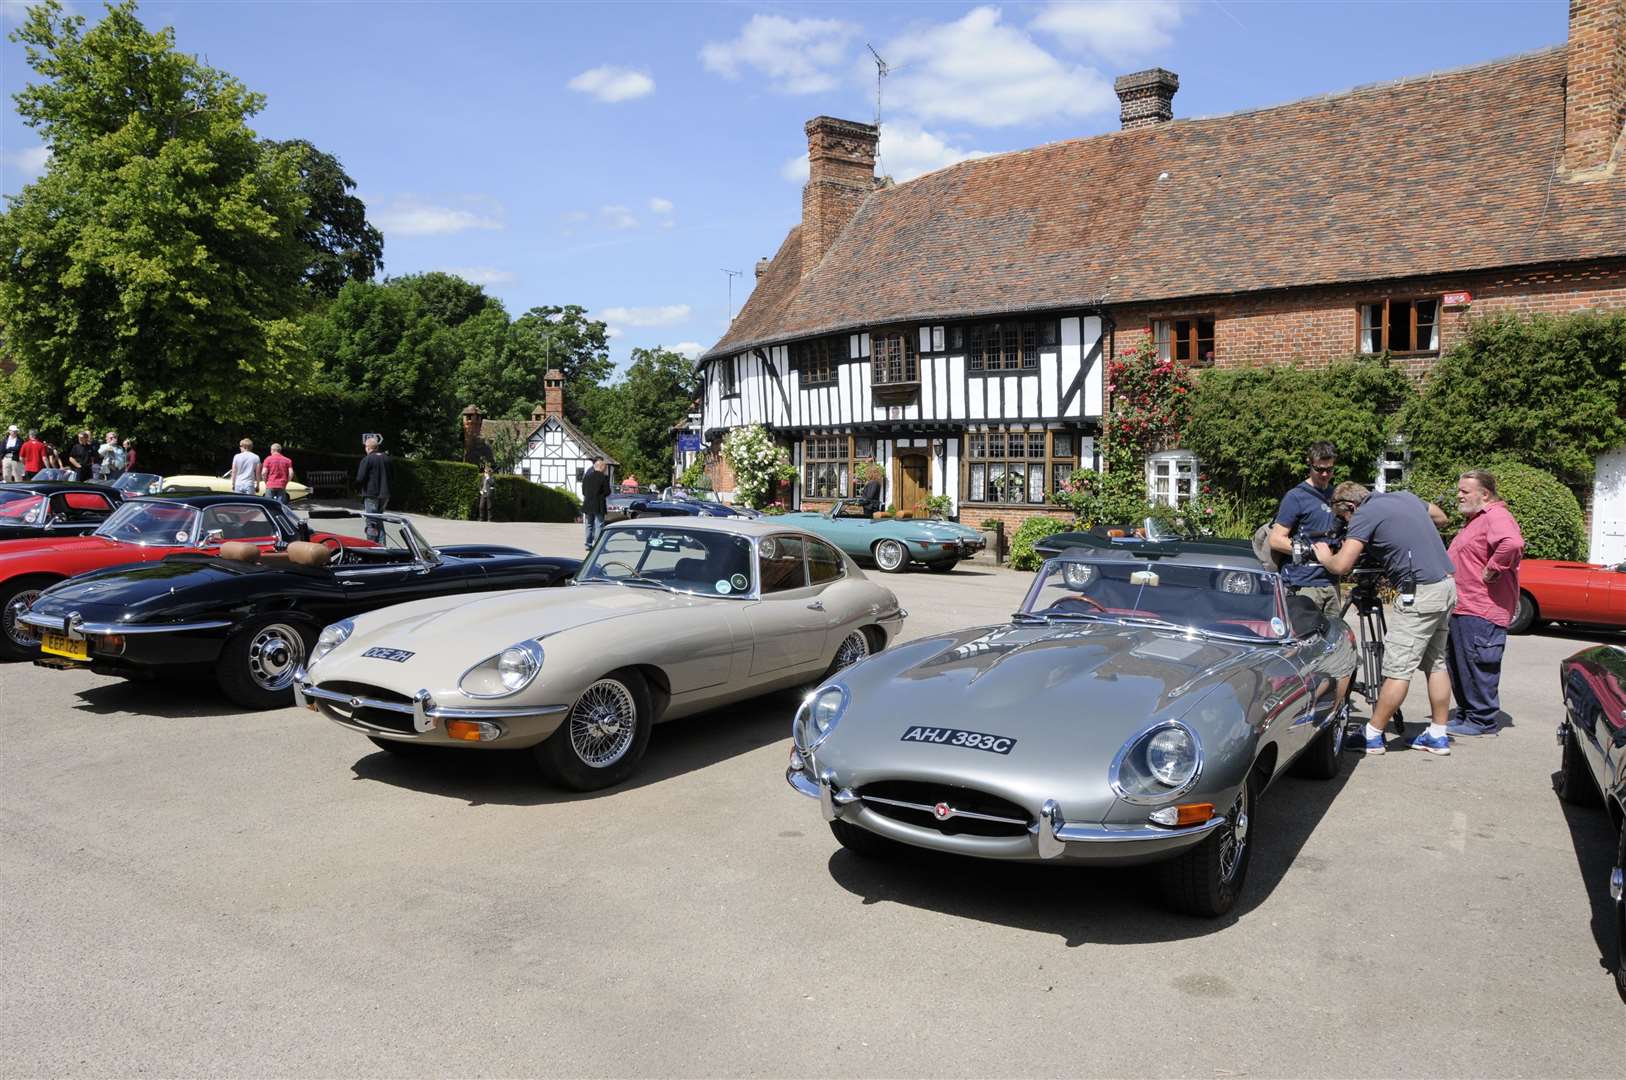 A multi-million pound collection of E-Types on display. Those who were there can maybe remember Clarkson crunching the gears as he drove away